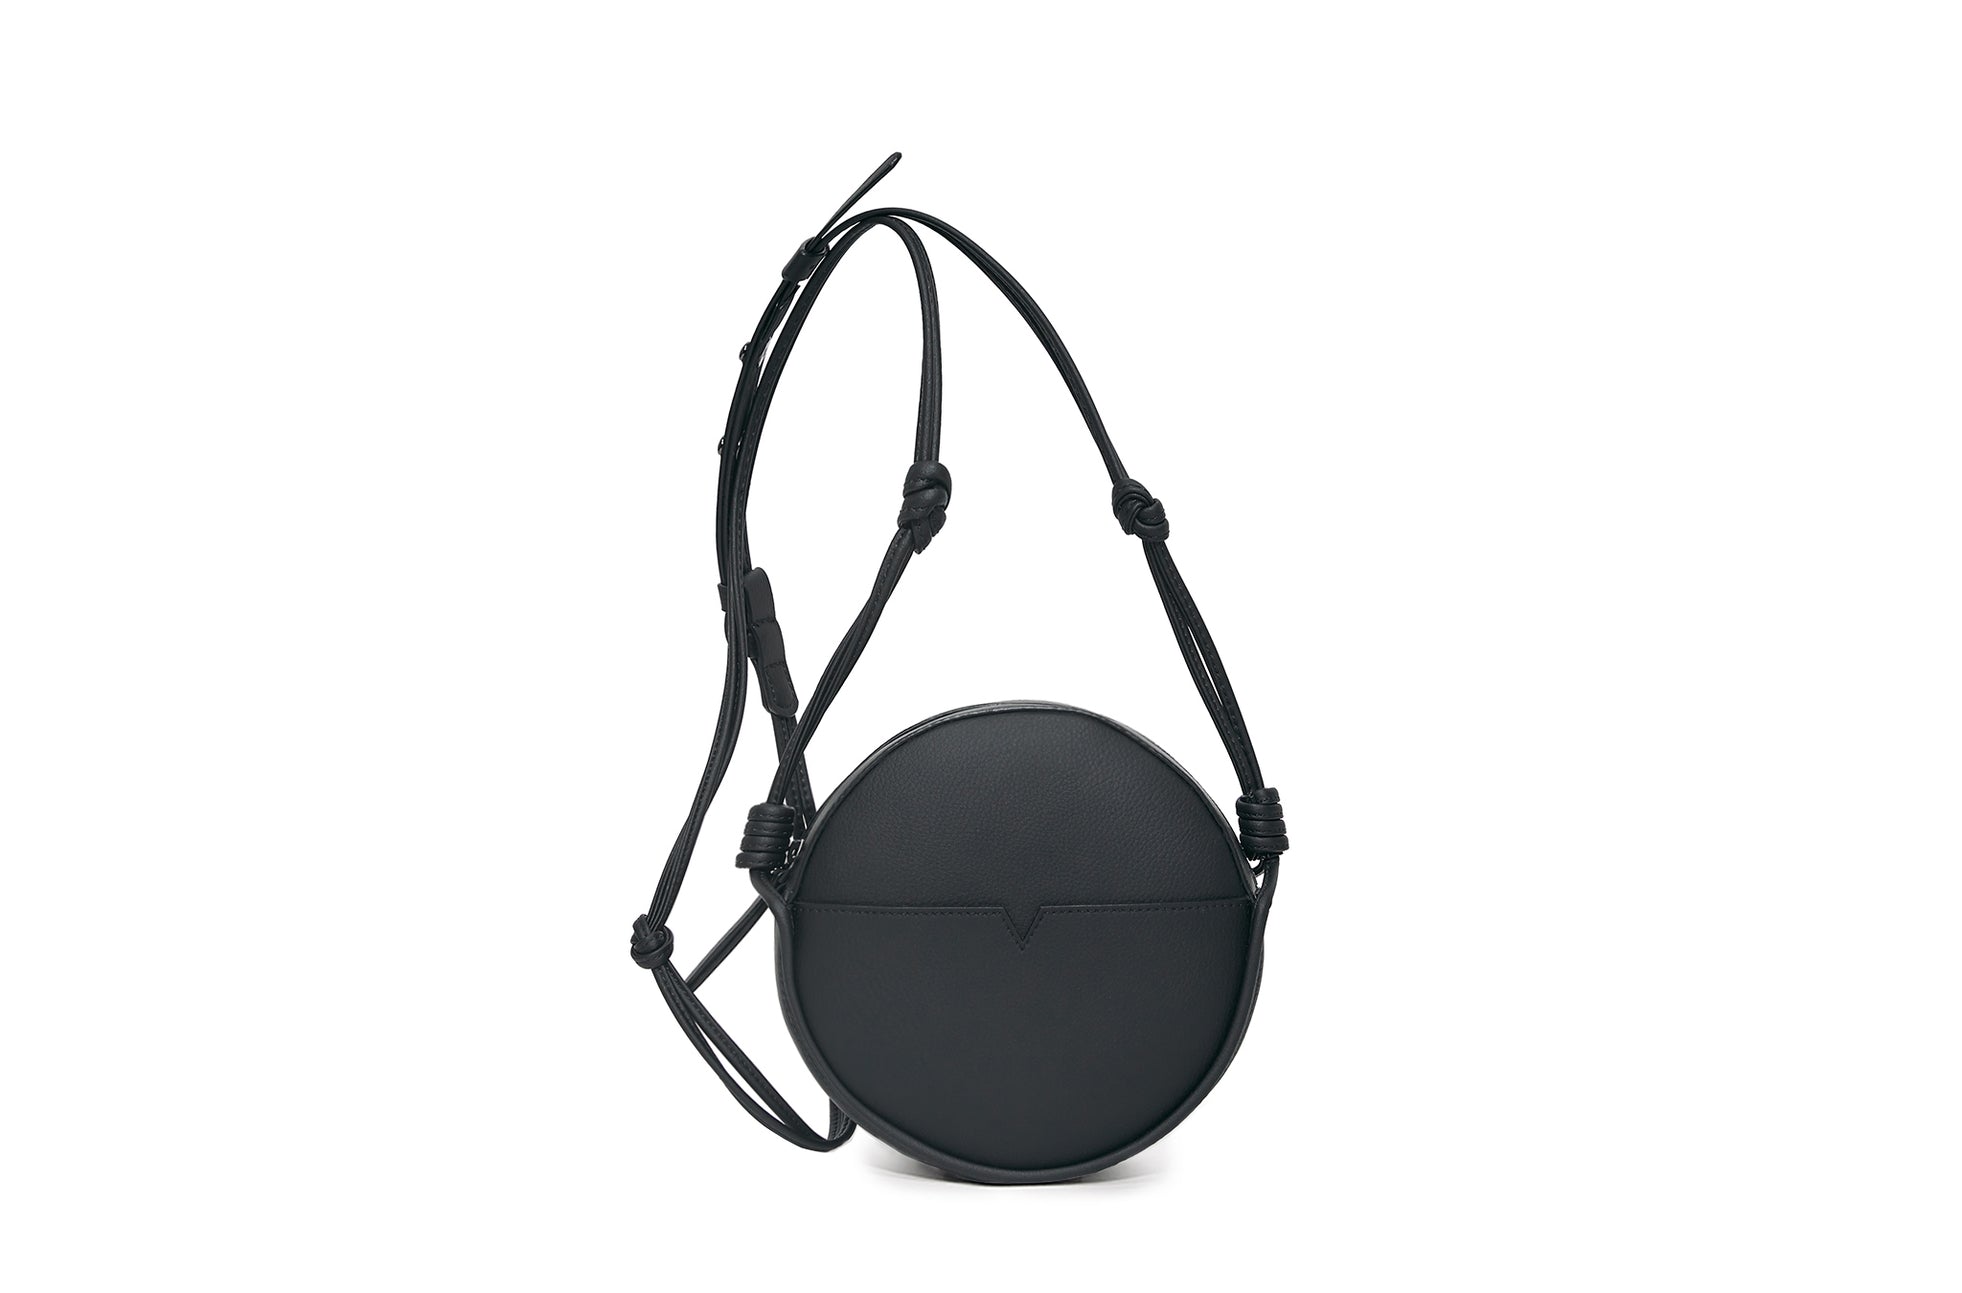 The Circle Crossbody in Banbū Leather in Black image 1